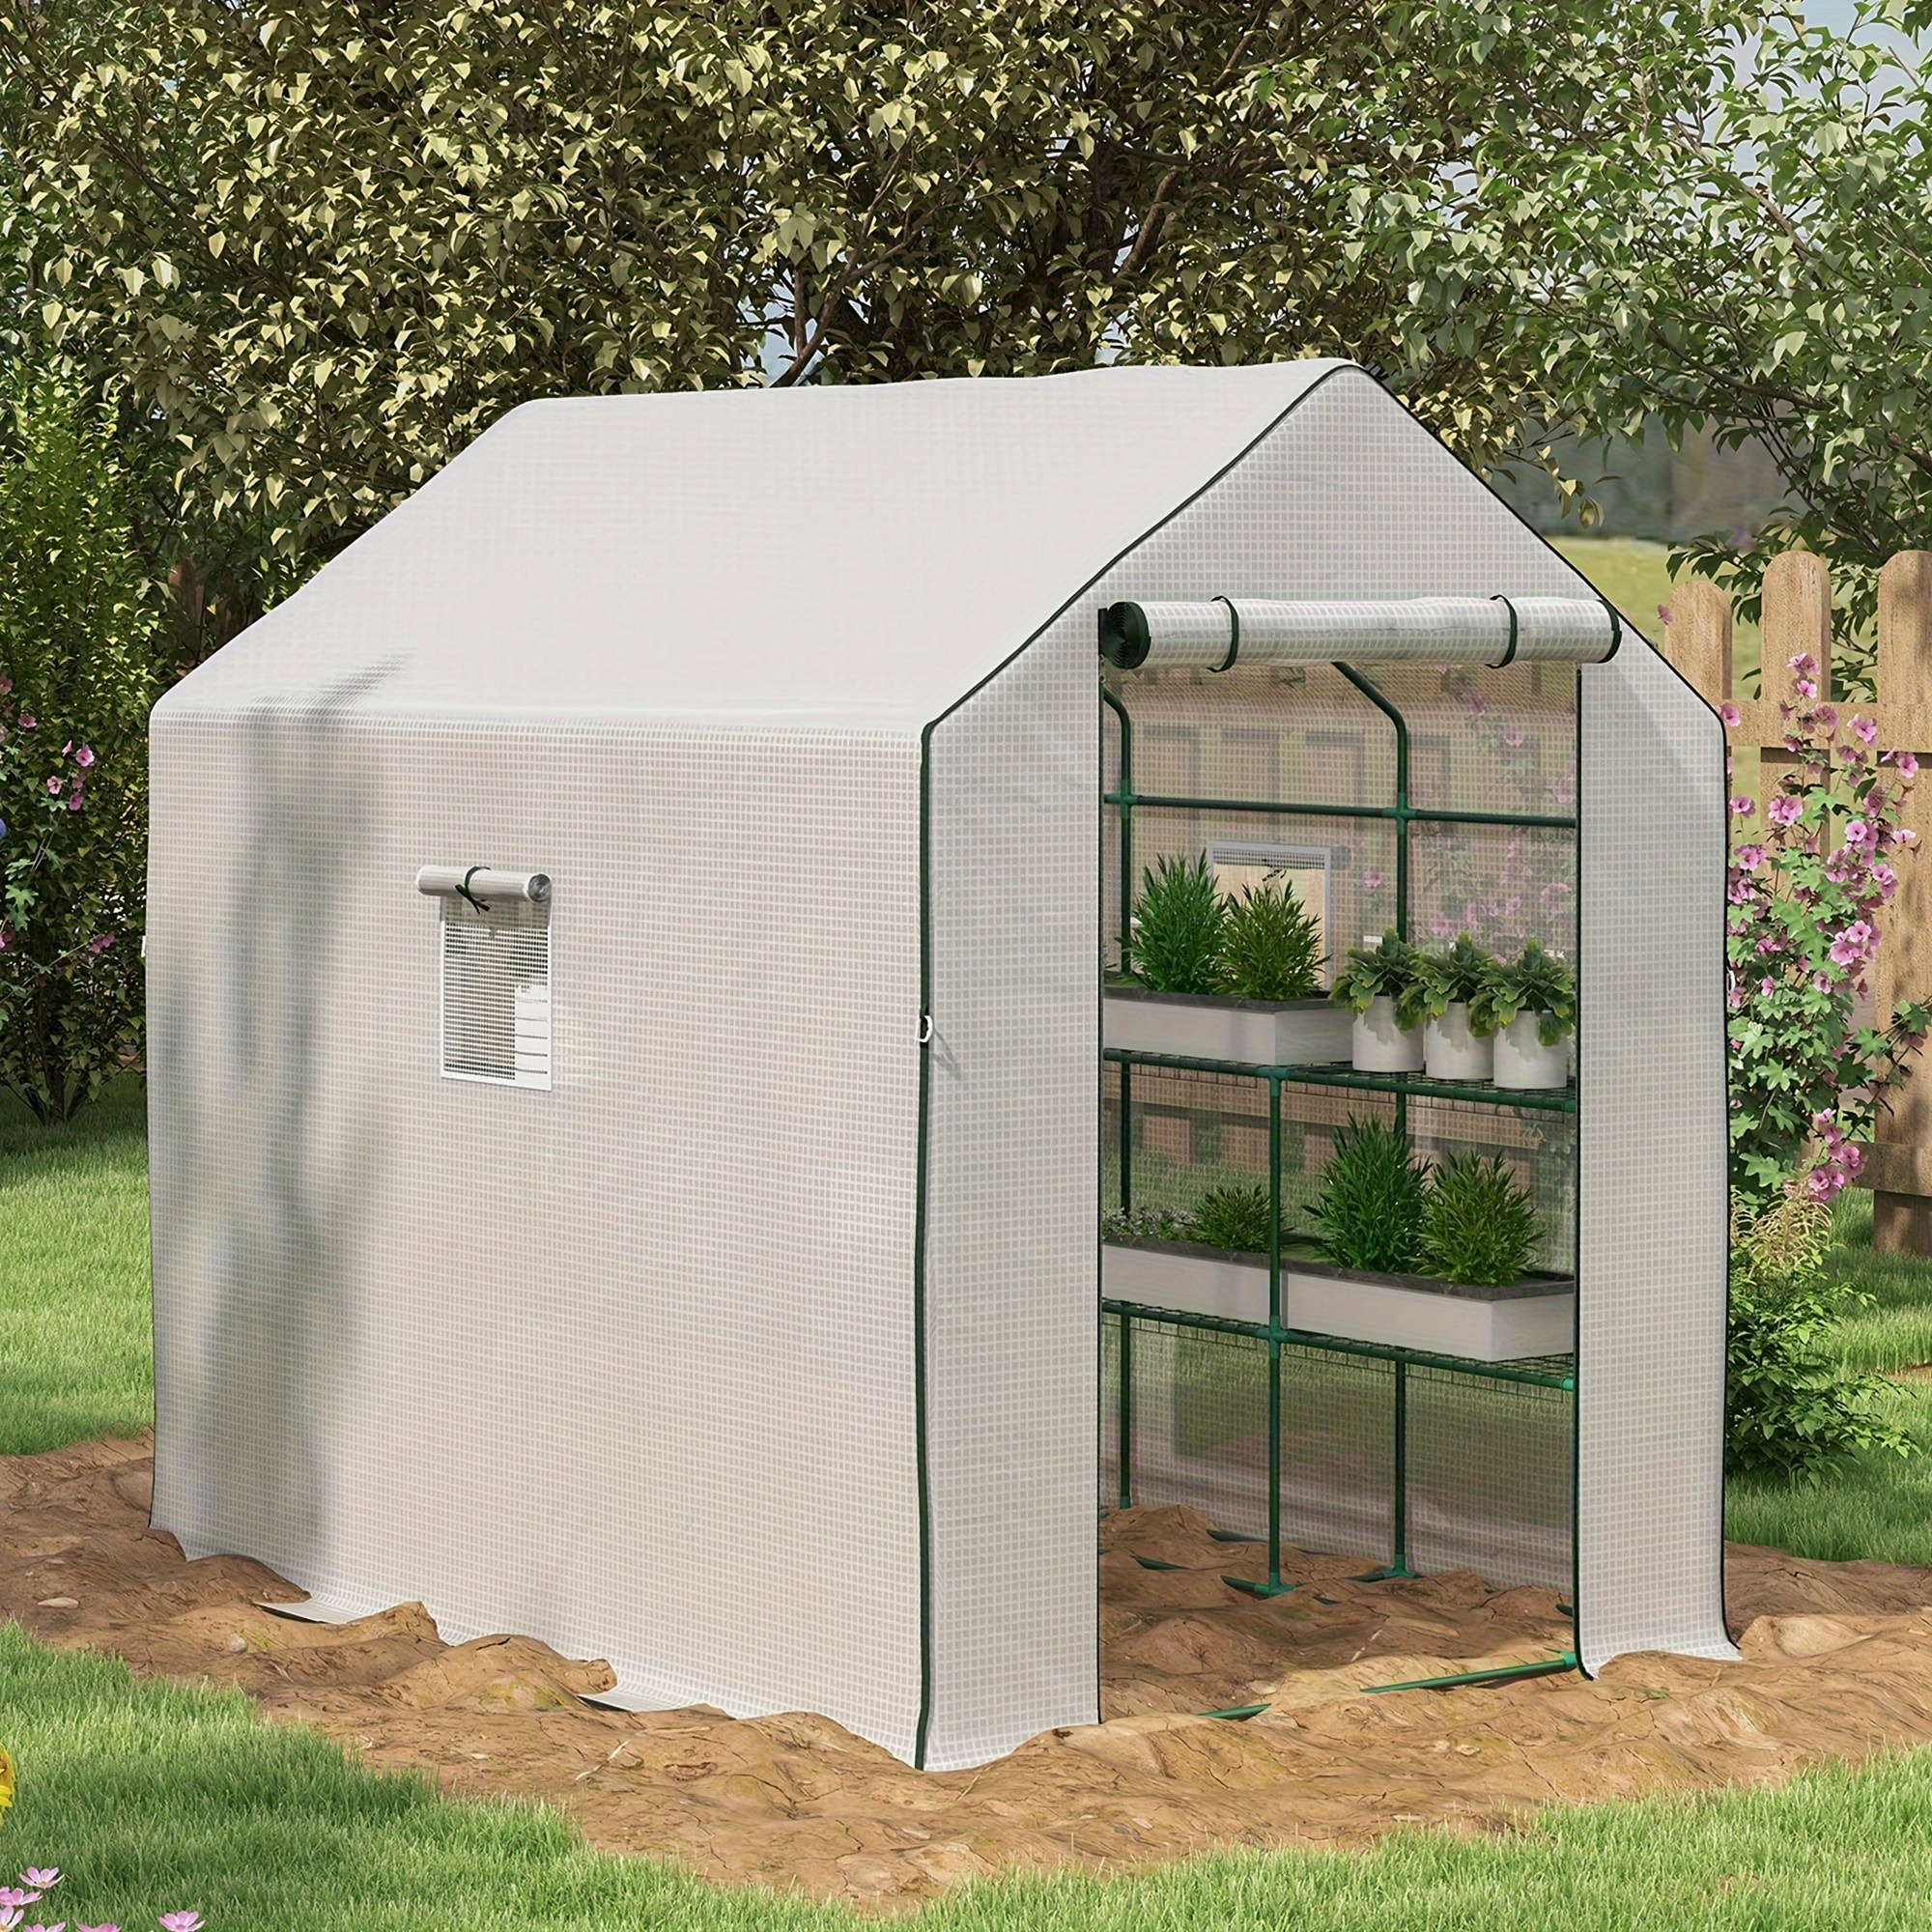 

Outsunny 4.6' X 4.7' Portable Greenhouse, Water/uv Resistant Walk-in Small Outdoor Green House With 2 Tier U-shaped Flower Rack Shelves, Roll Up Door & Windows, White